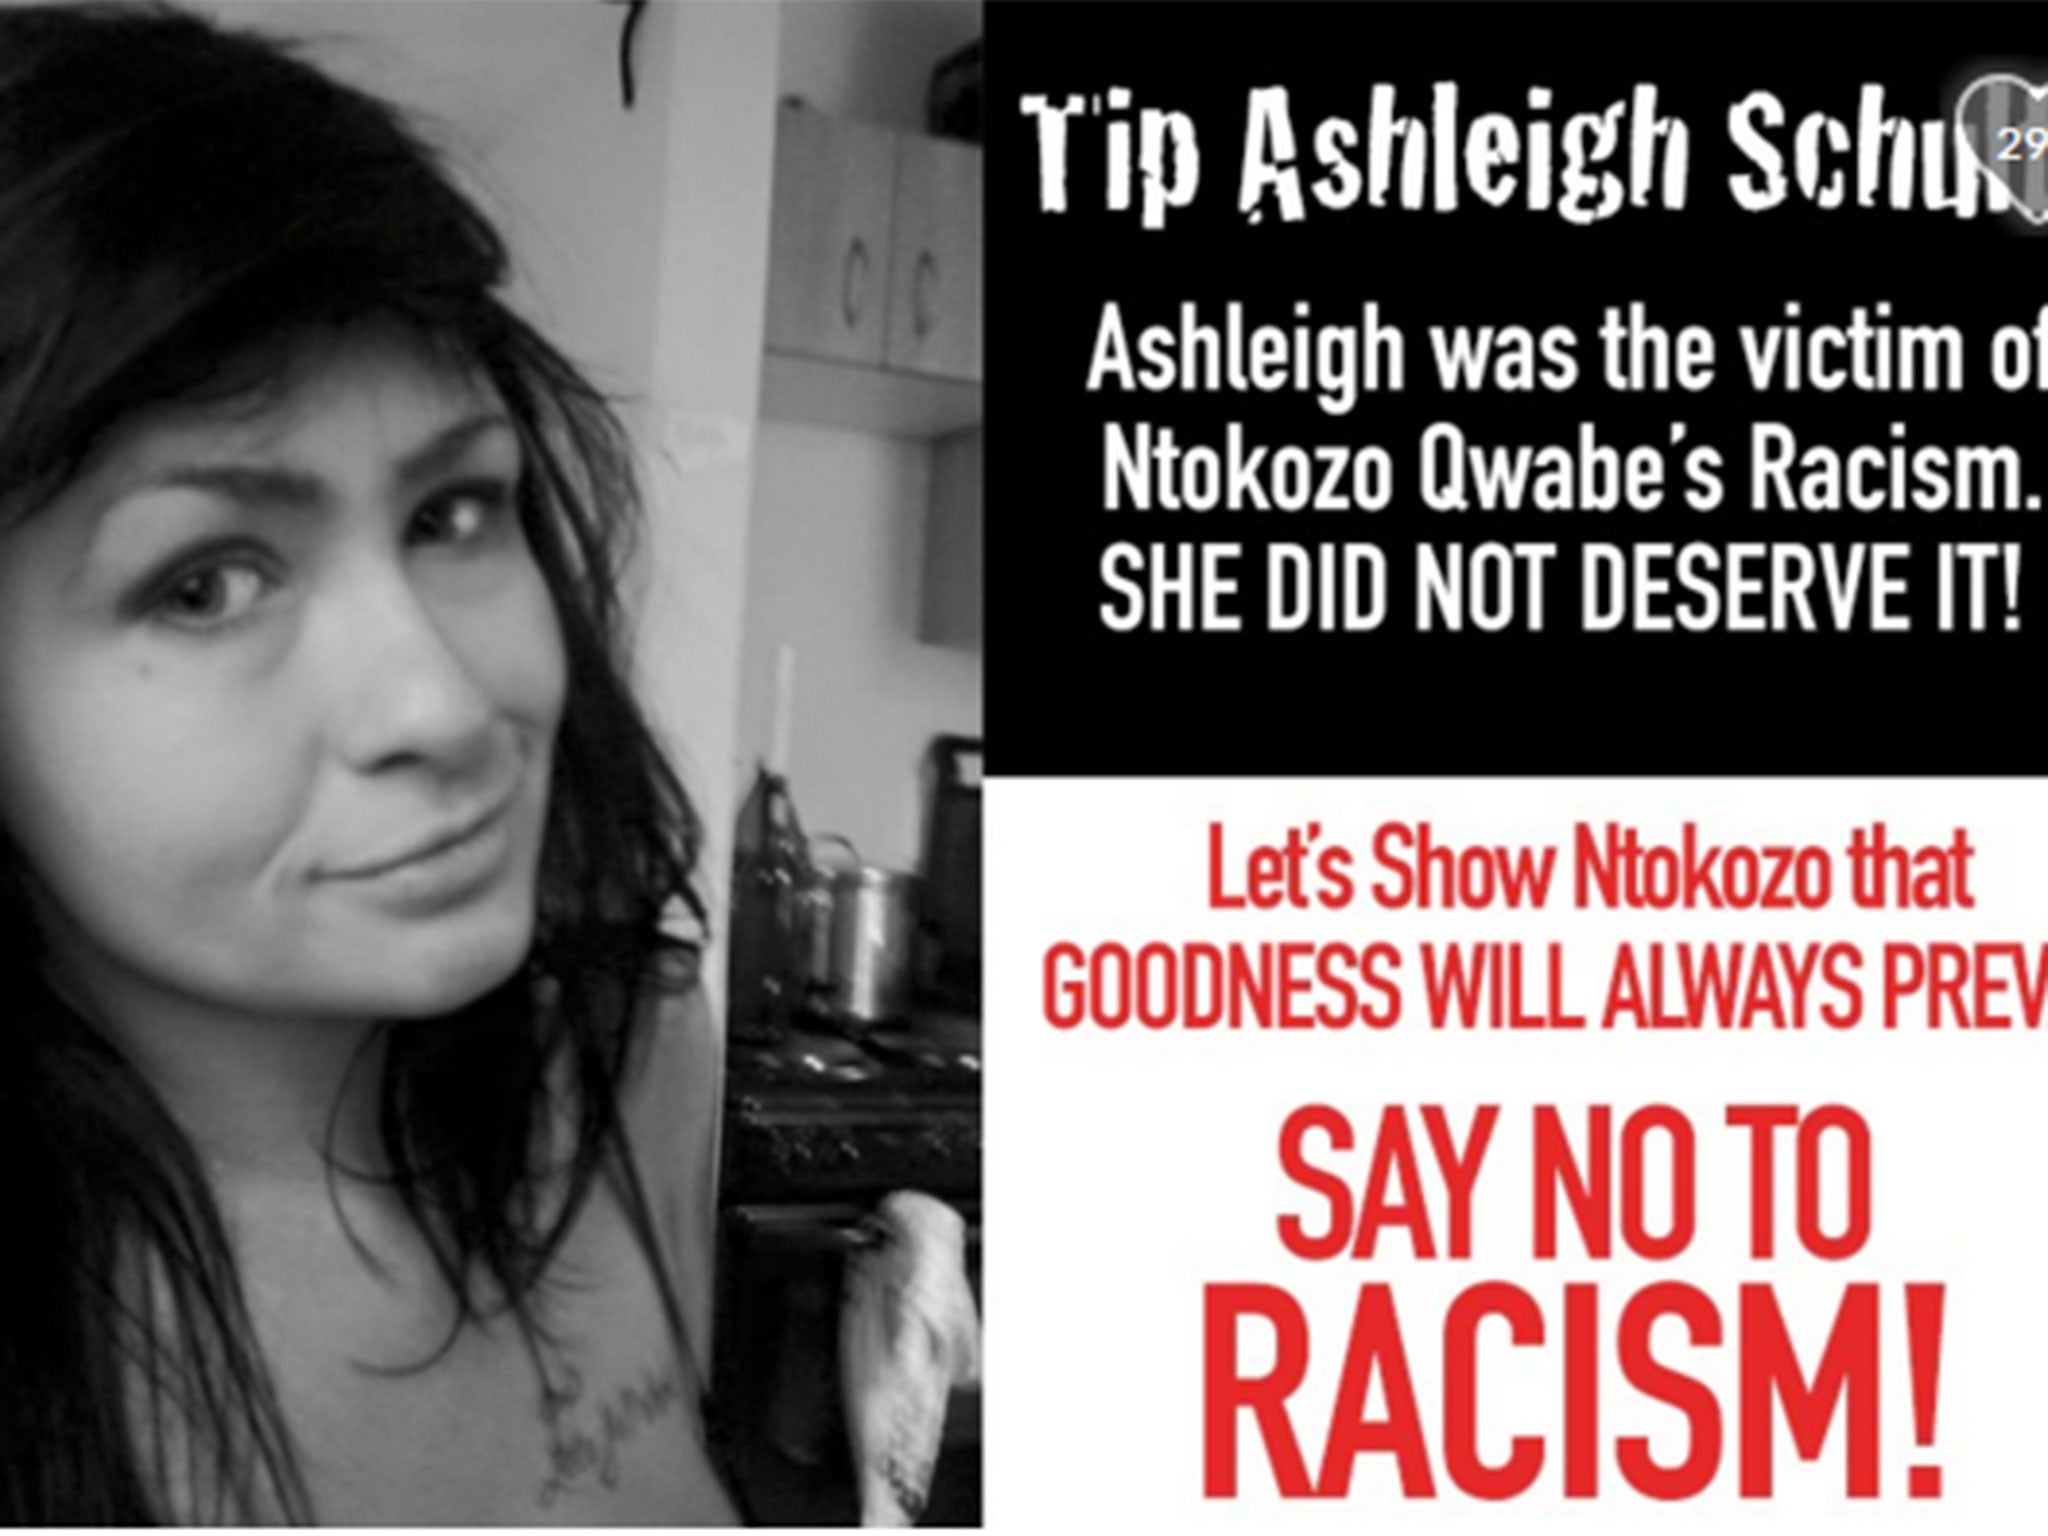 The picture used on the GoFundMe page set up for people to donate to Ashleigh